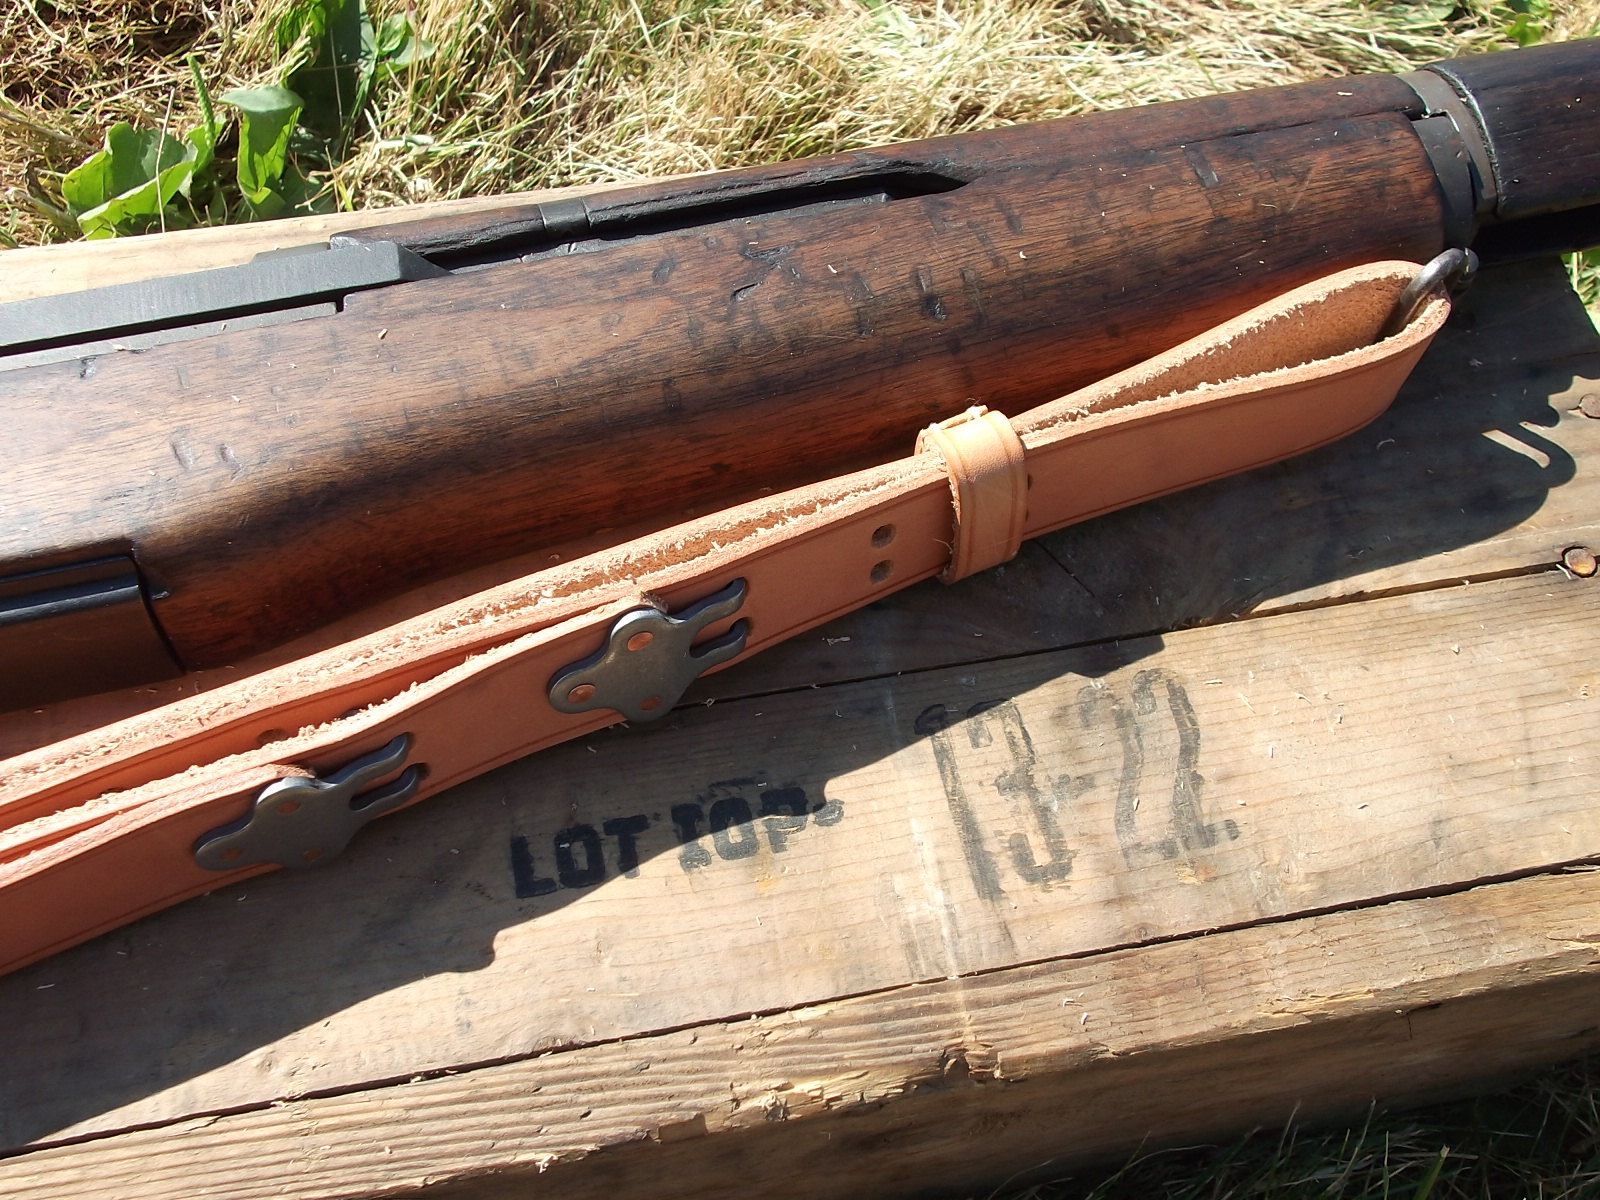 This completes the basic installation of the M1907 sling on the M1 Garand. 